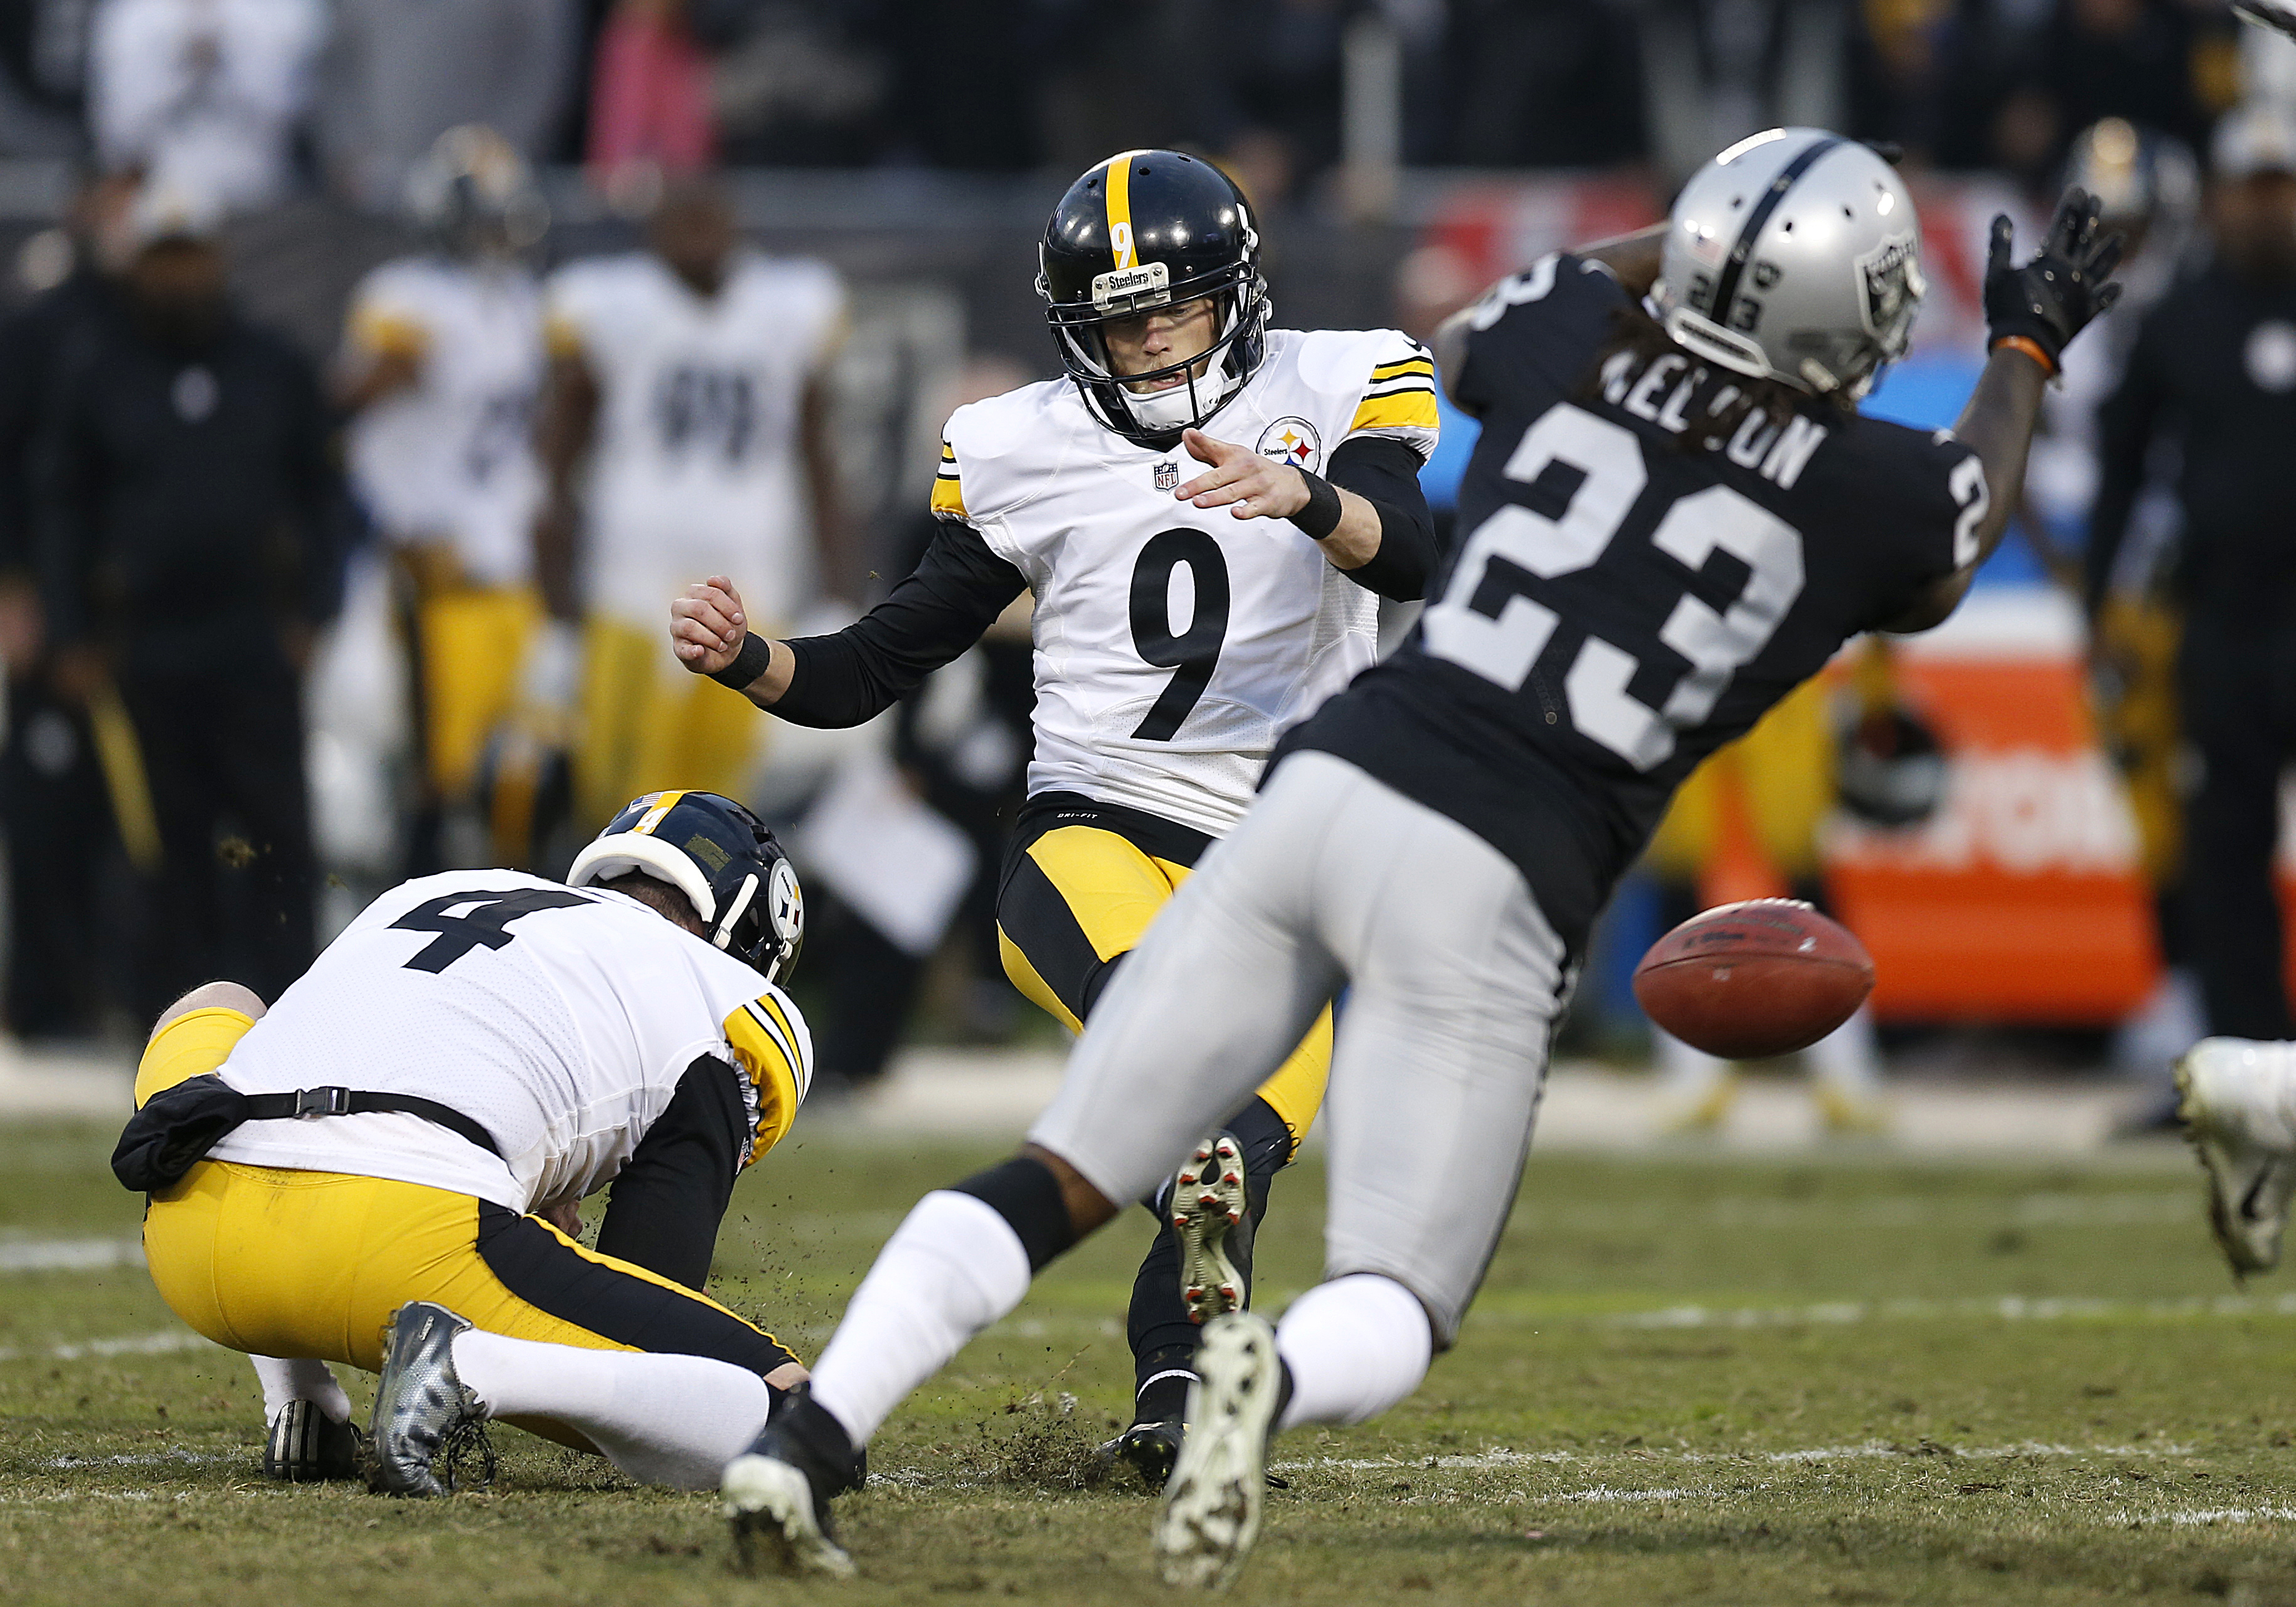 Boswell's missed FG sends Steelers to 24-21 loss to Raiders